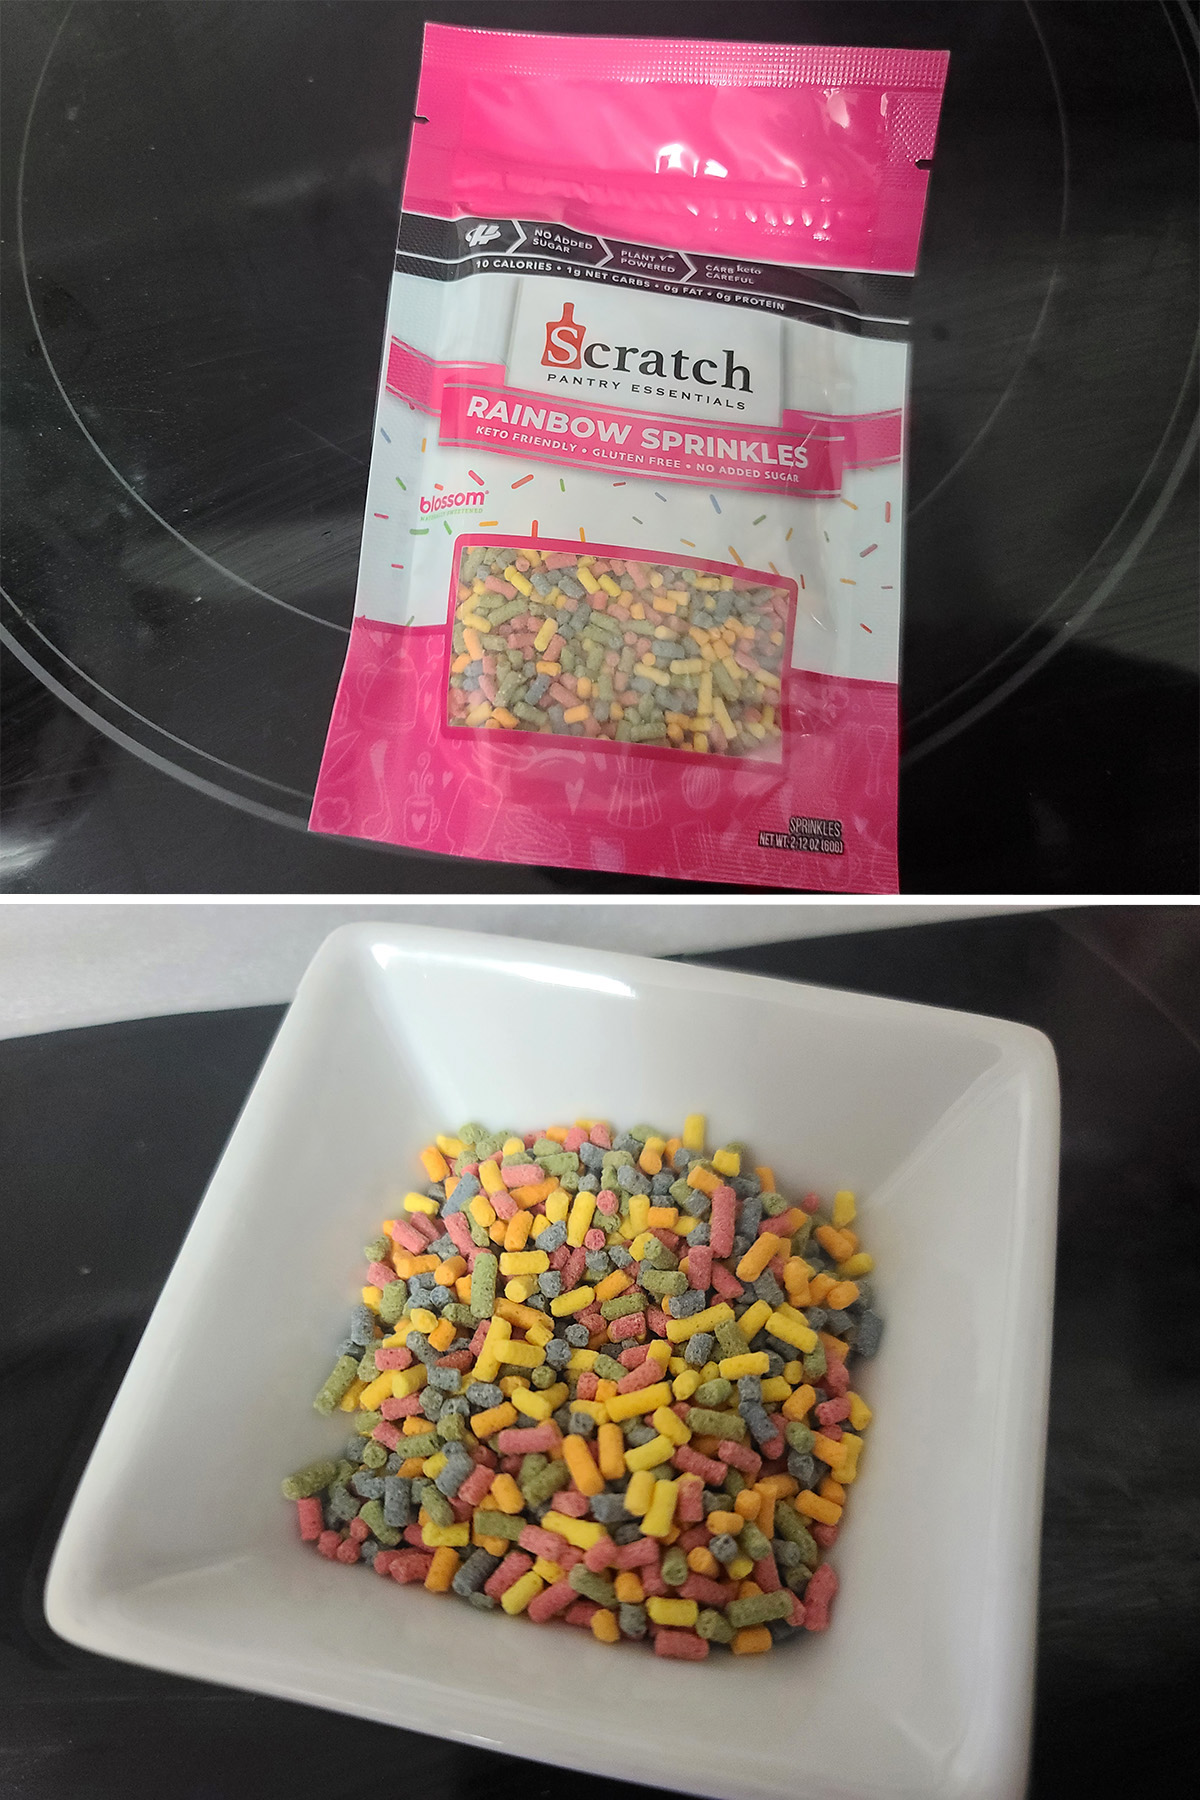 A 2 part image showing a bag of keto sprinkles and a bowl of the same.